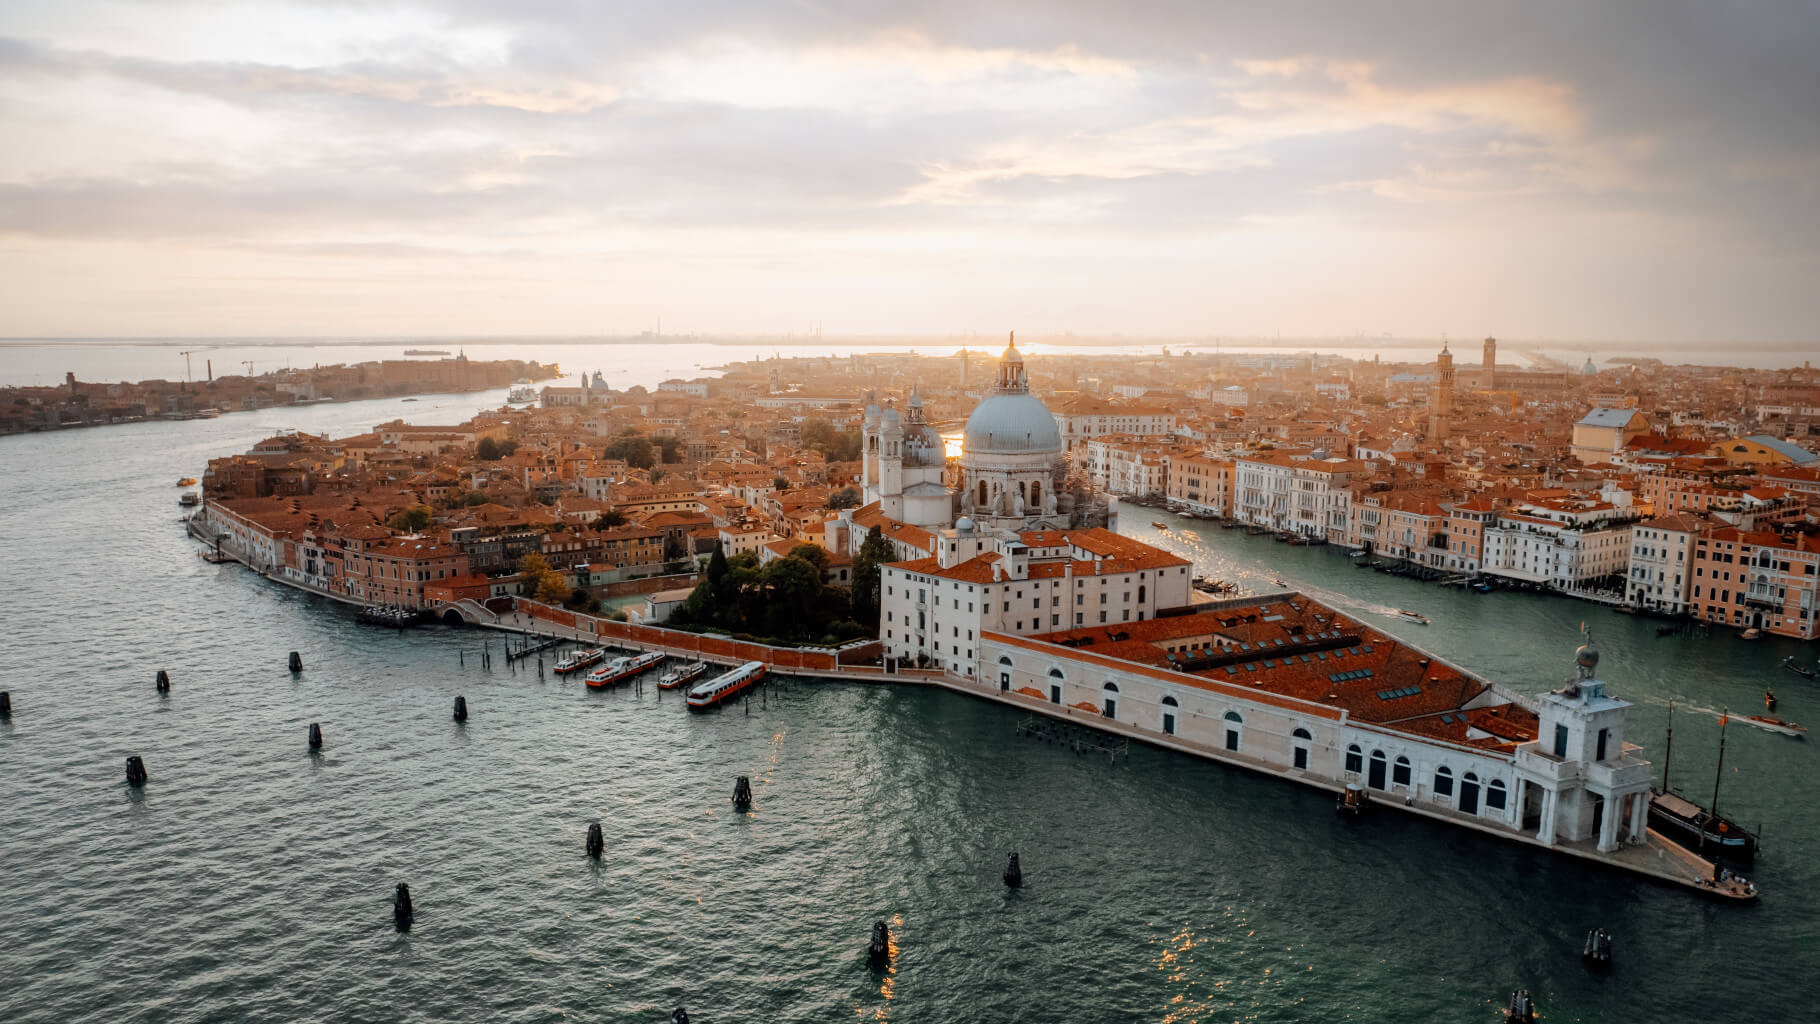 The Tour to visit Venice in a day